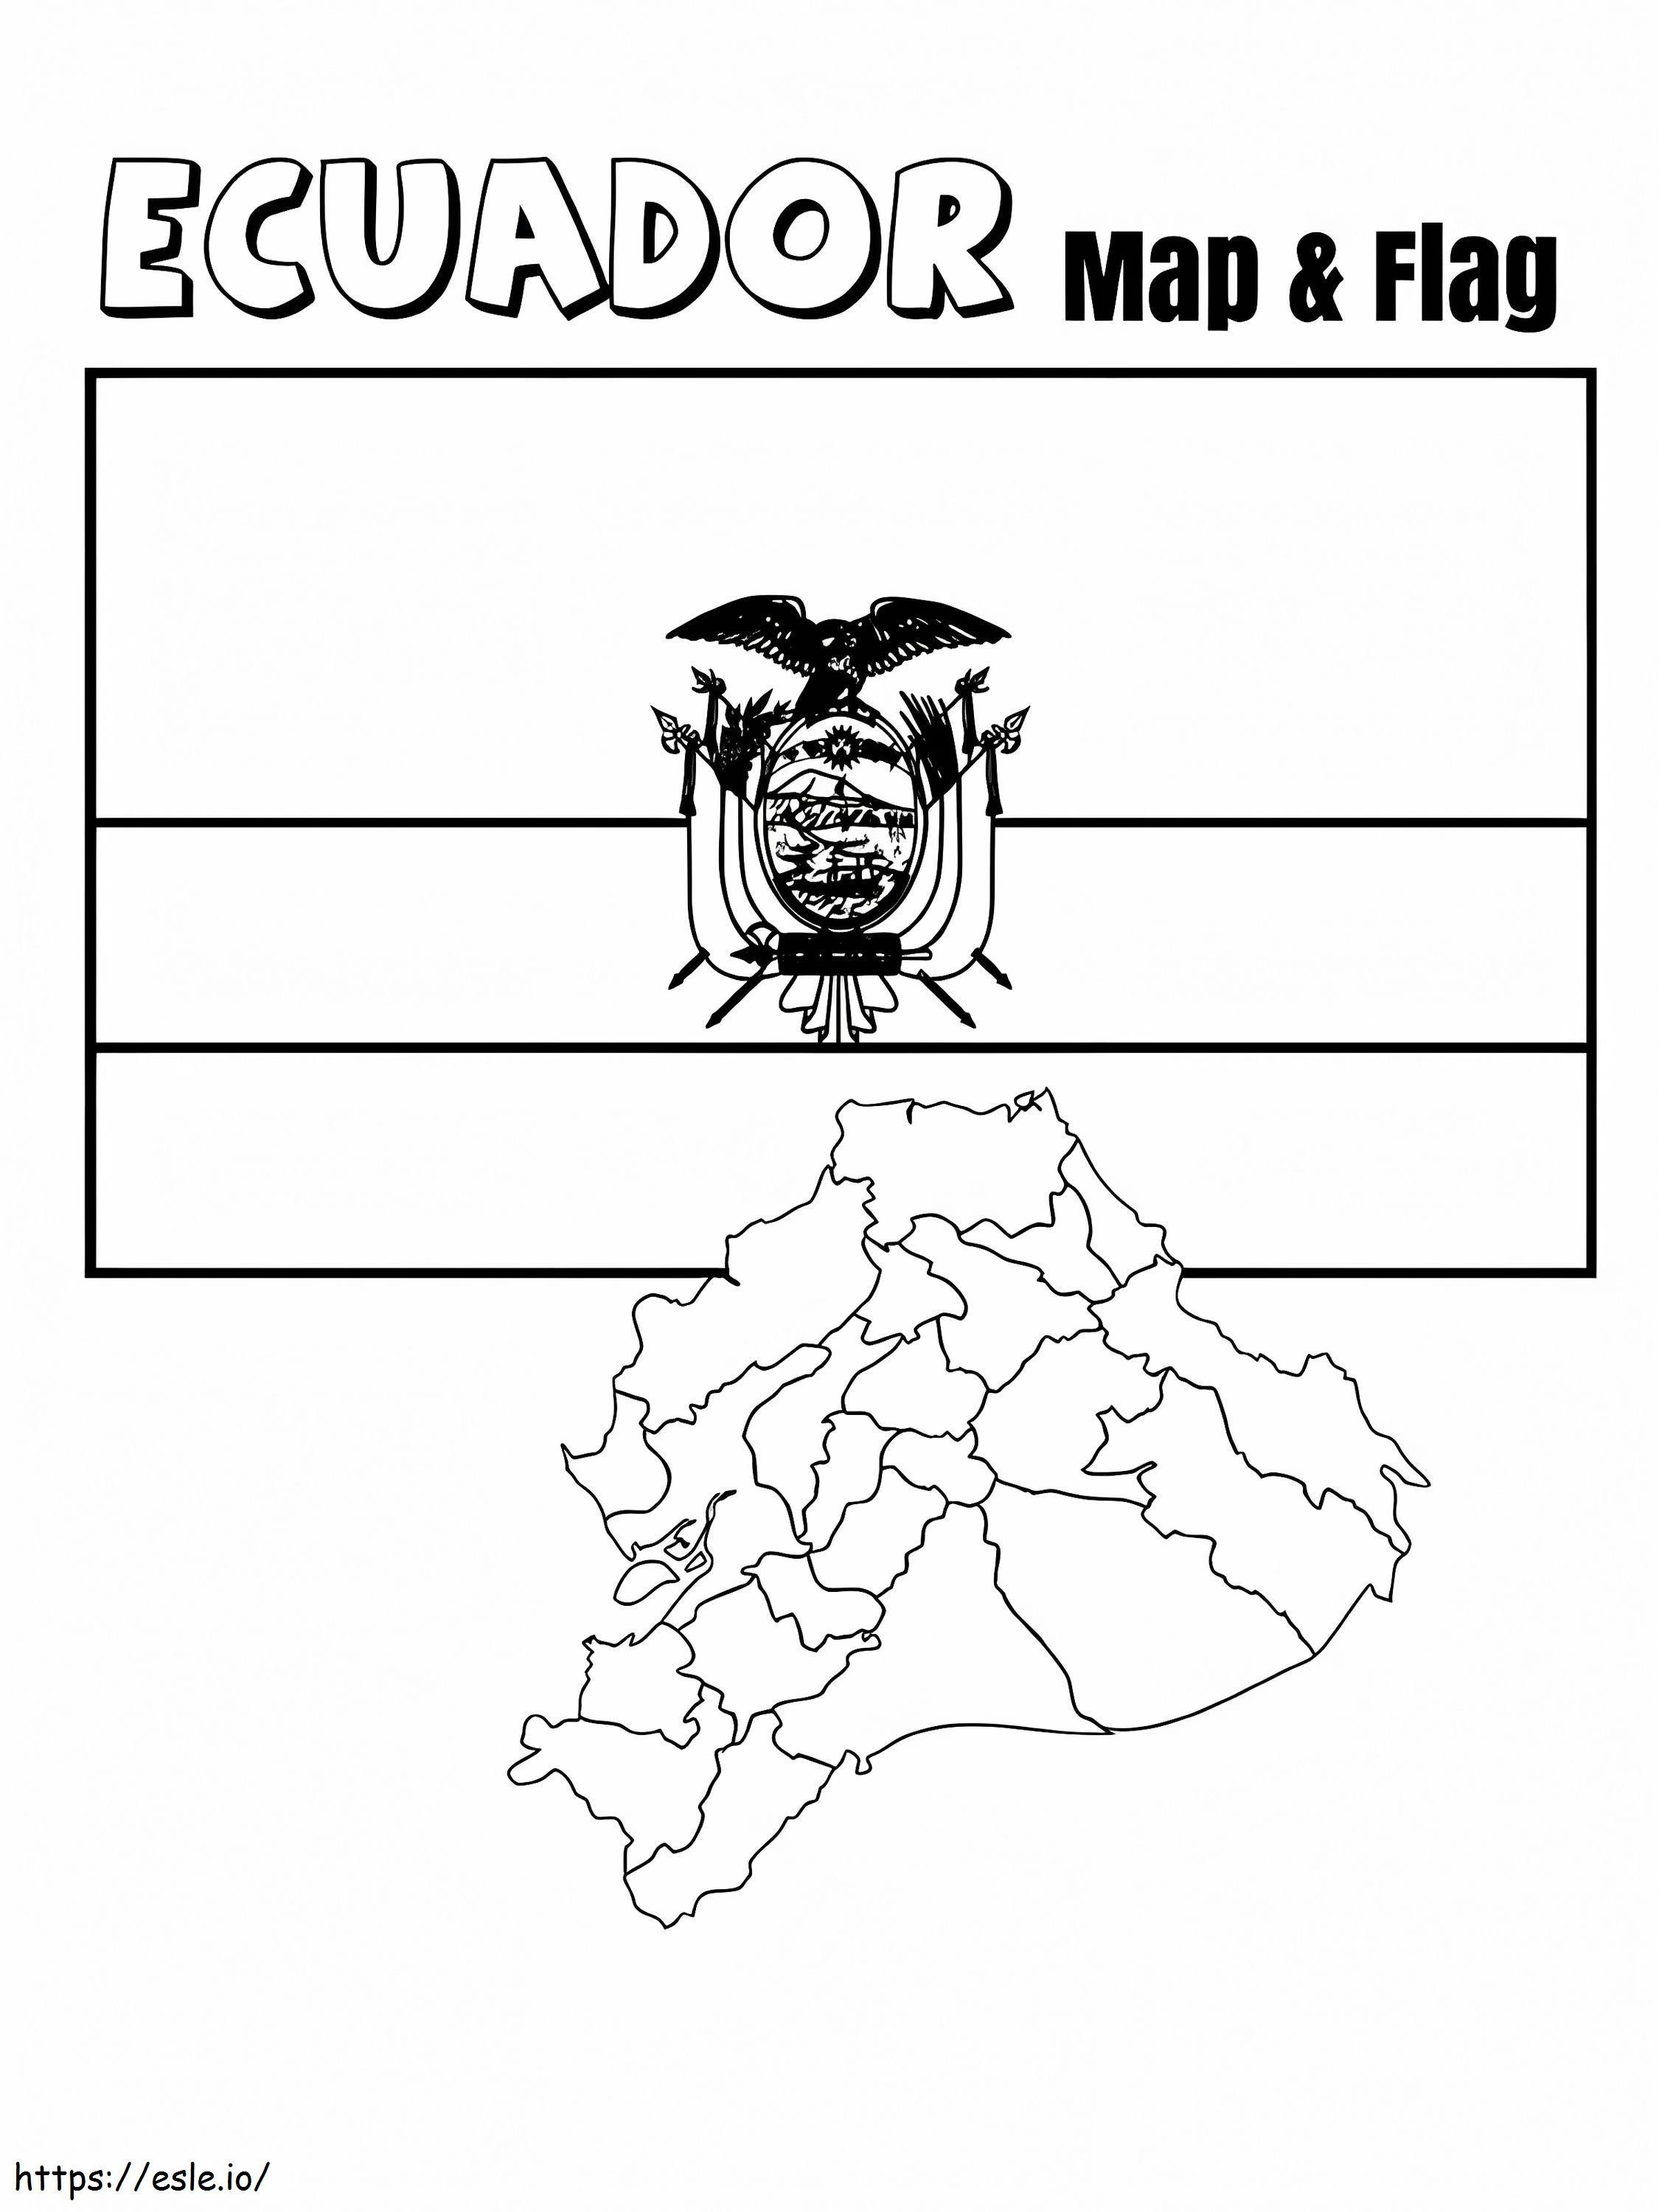 Ecuador Map And Flag coloring page